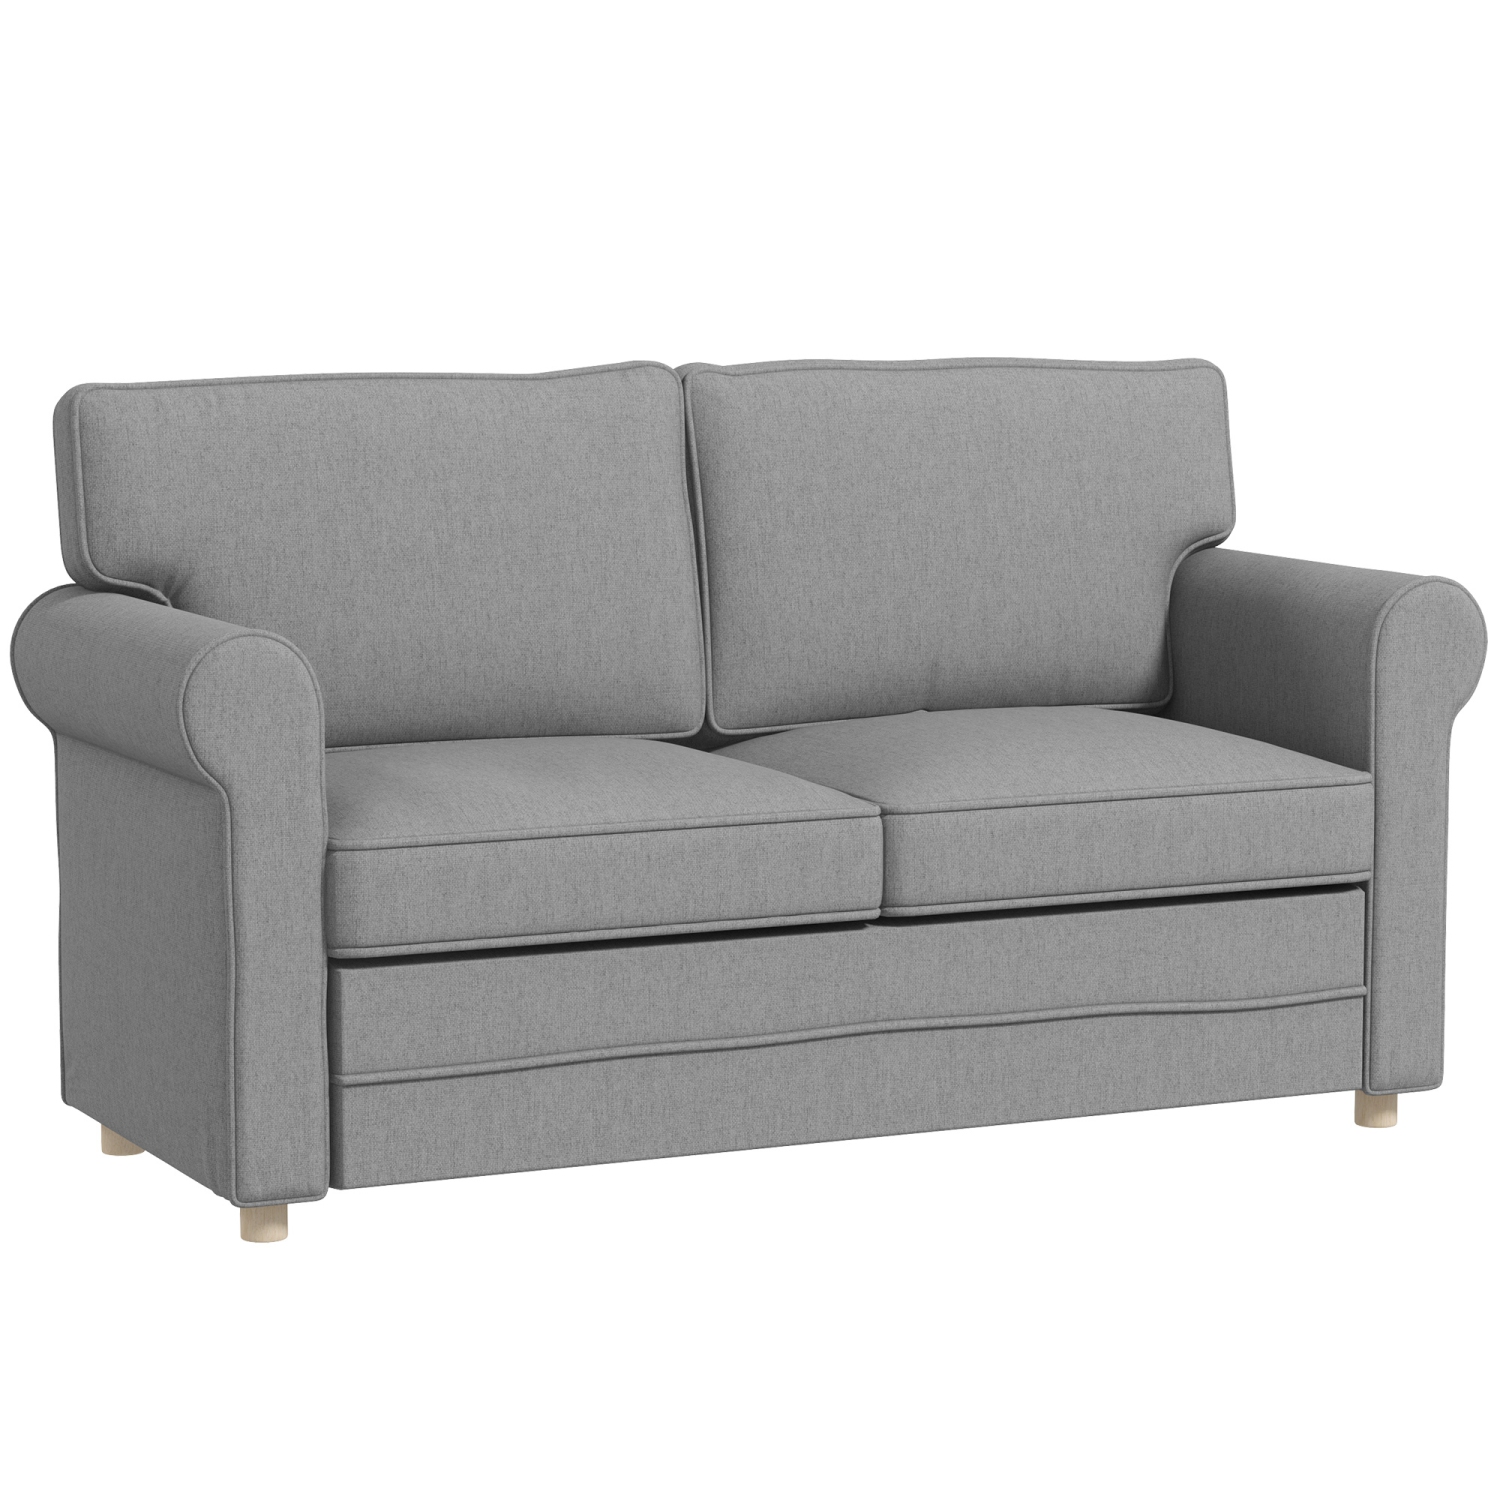 HOMCOM 59" Loveseat Sofa for Bedroom, Modern Love Seats Furniture, Upholstered 2 Seater Couch with Solid Steel Frame and Beech Wood Legs, Med Grey